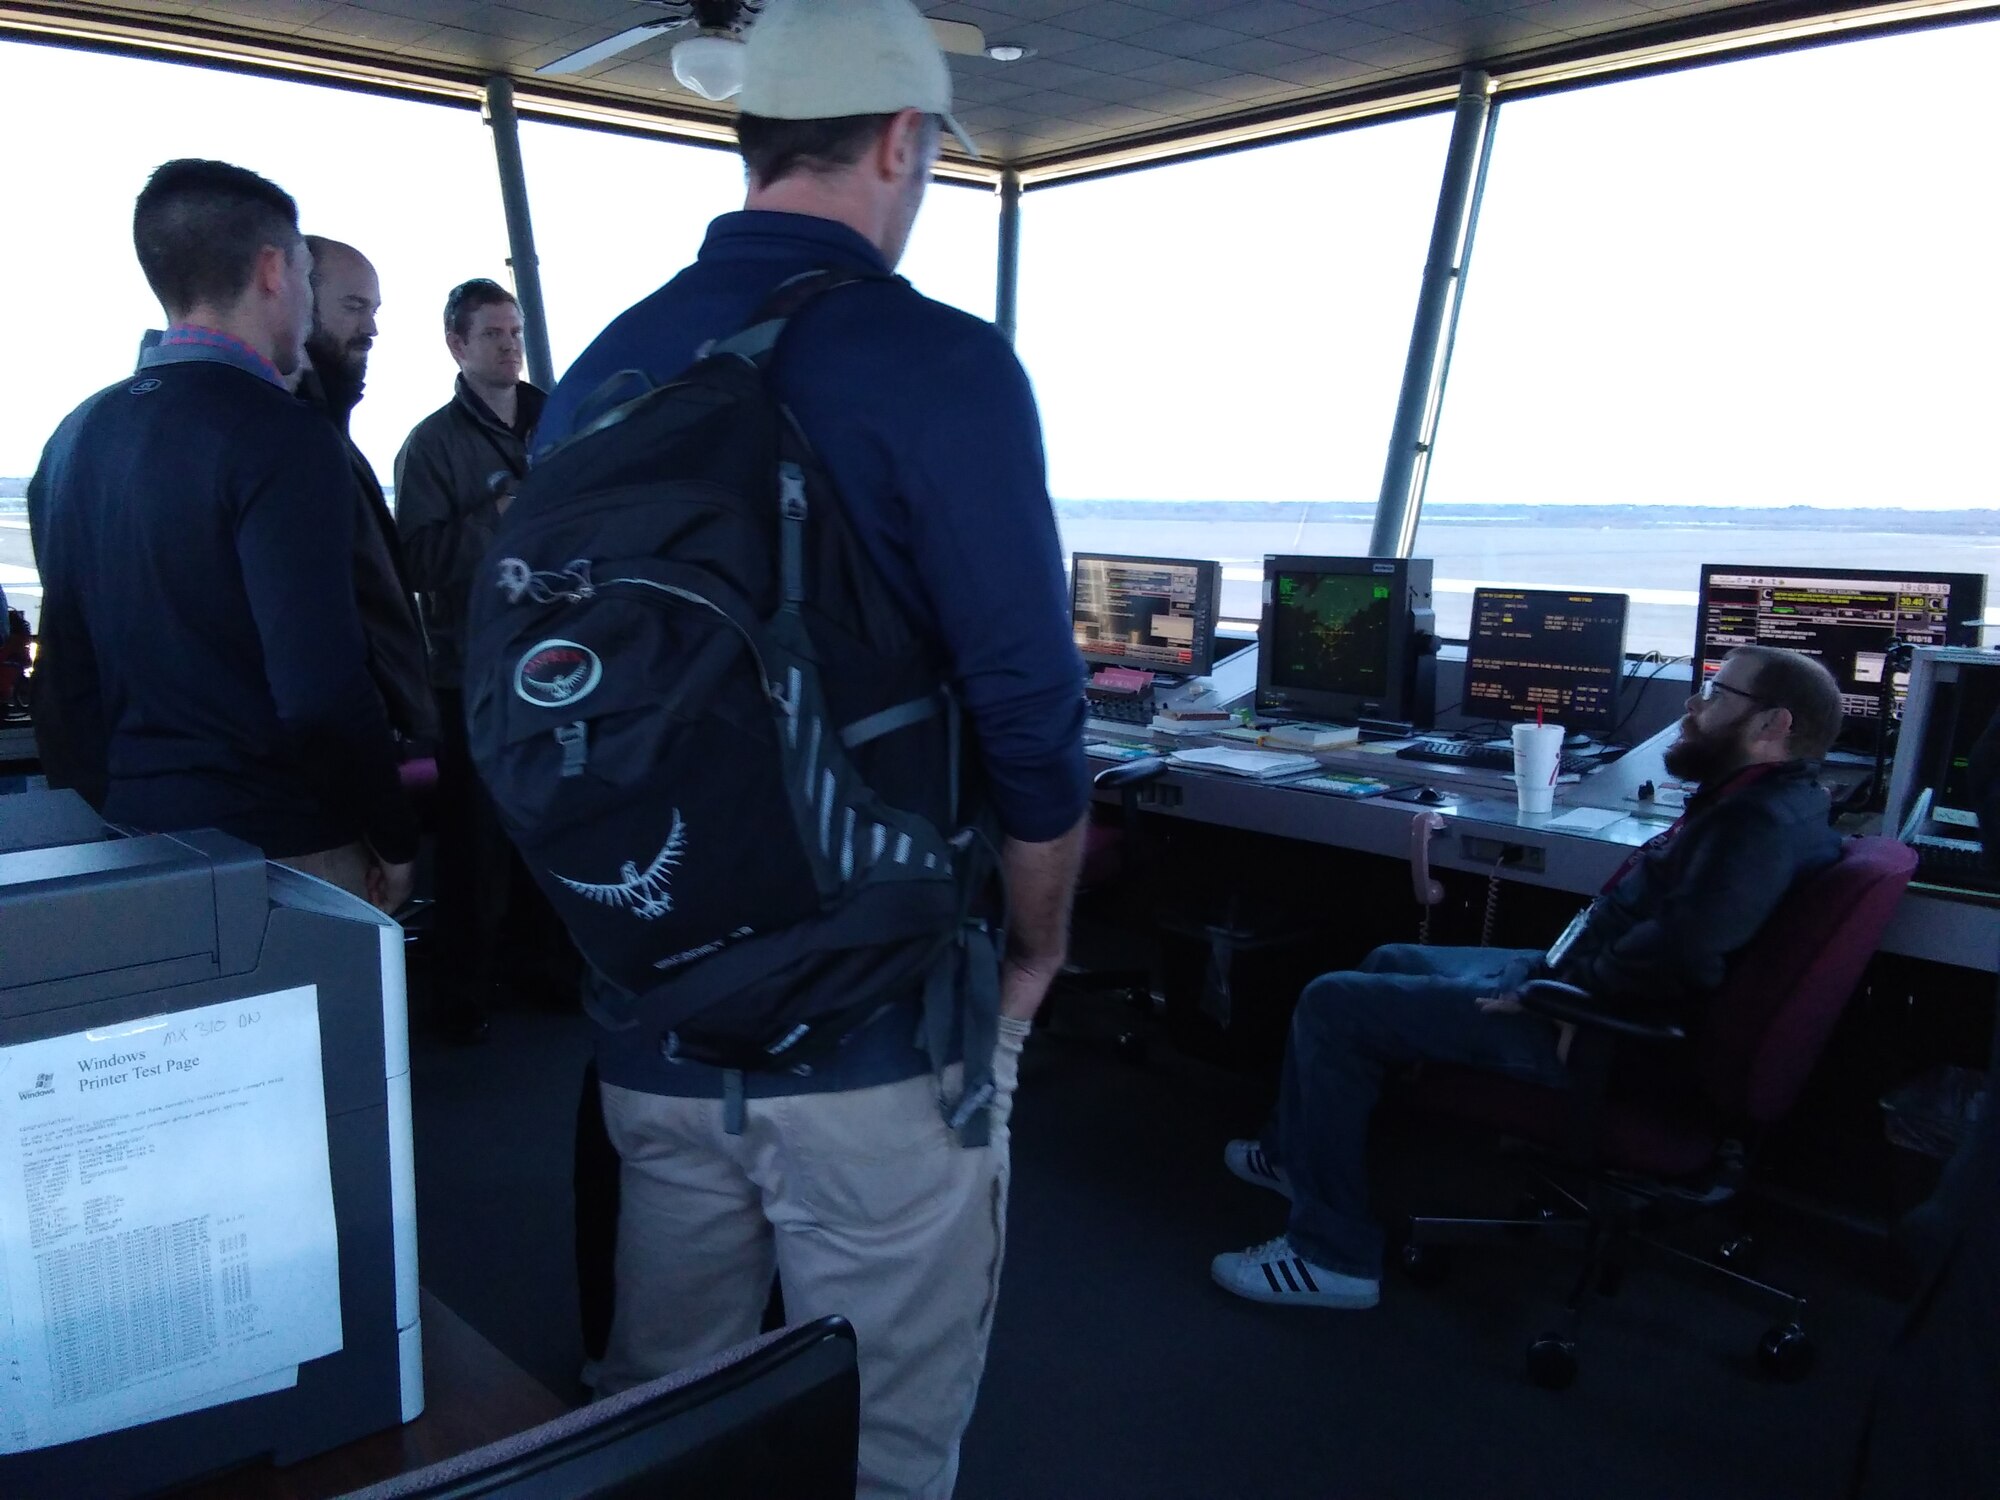 Students from multiple agencies attending the Aviation Domain Awareness Course visit the air traffic control tower at Mathis Airfield, San Angelo, Texas Dec. 7, 2017. Here the students received a rare first-hand look at how Air Traffic Controllers de-conflict inbound and outbound aircraft to ensure streamlined flight operations. (U.S. Air Force photo by Capt. Jacob Ewing/Released)